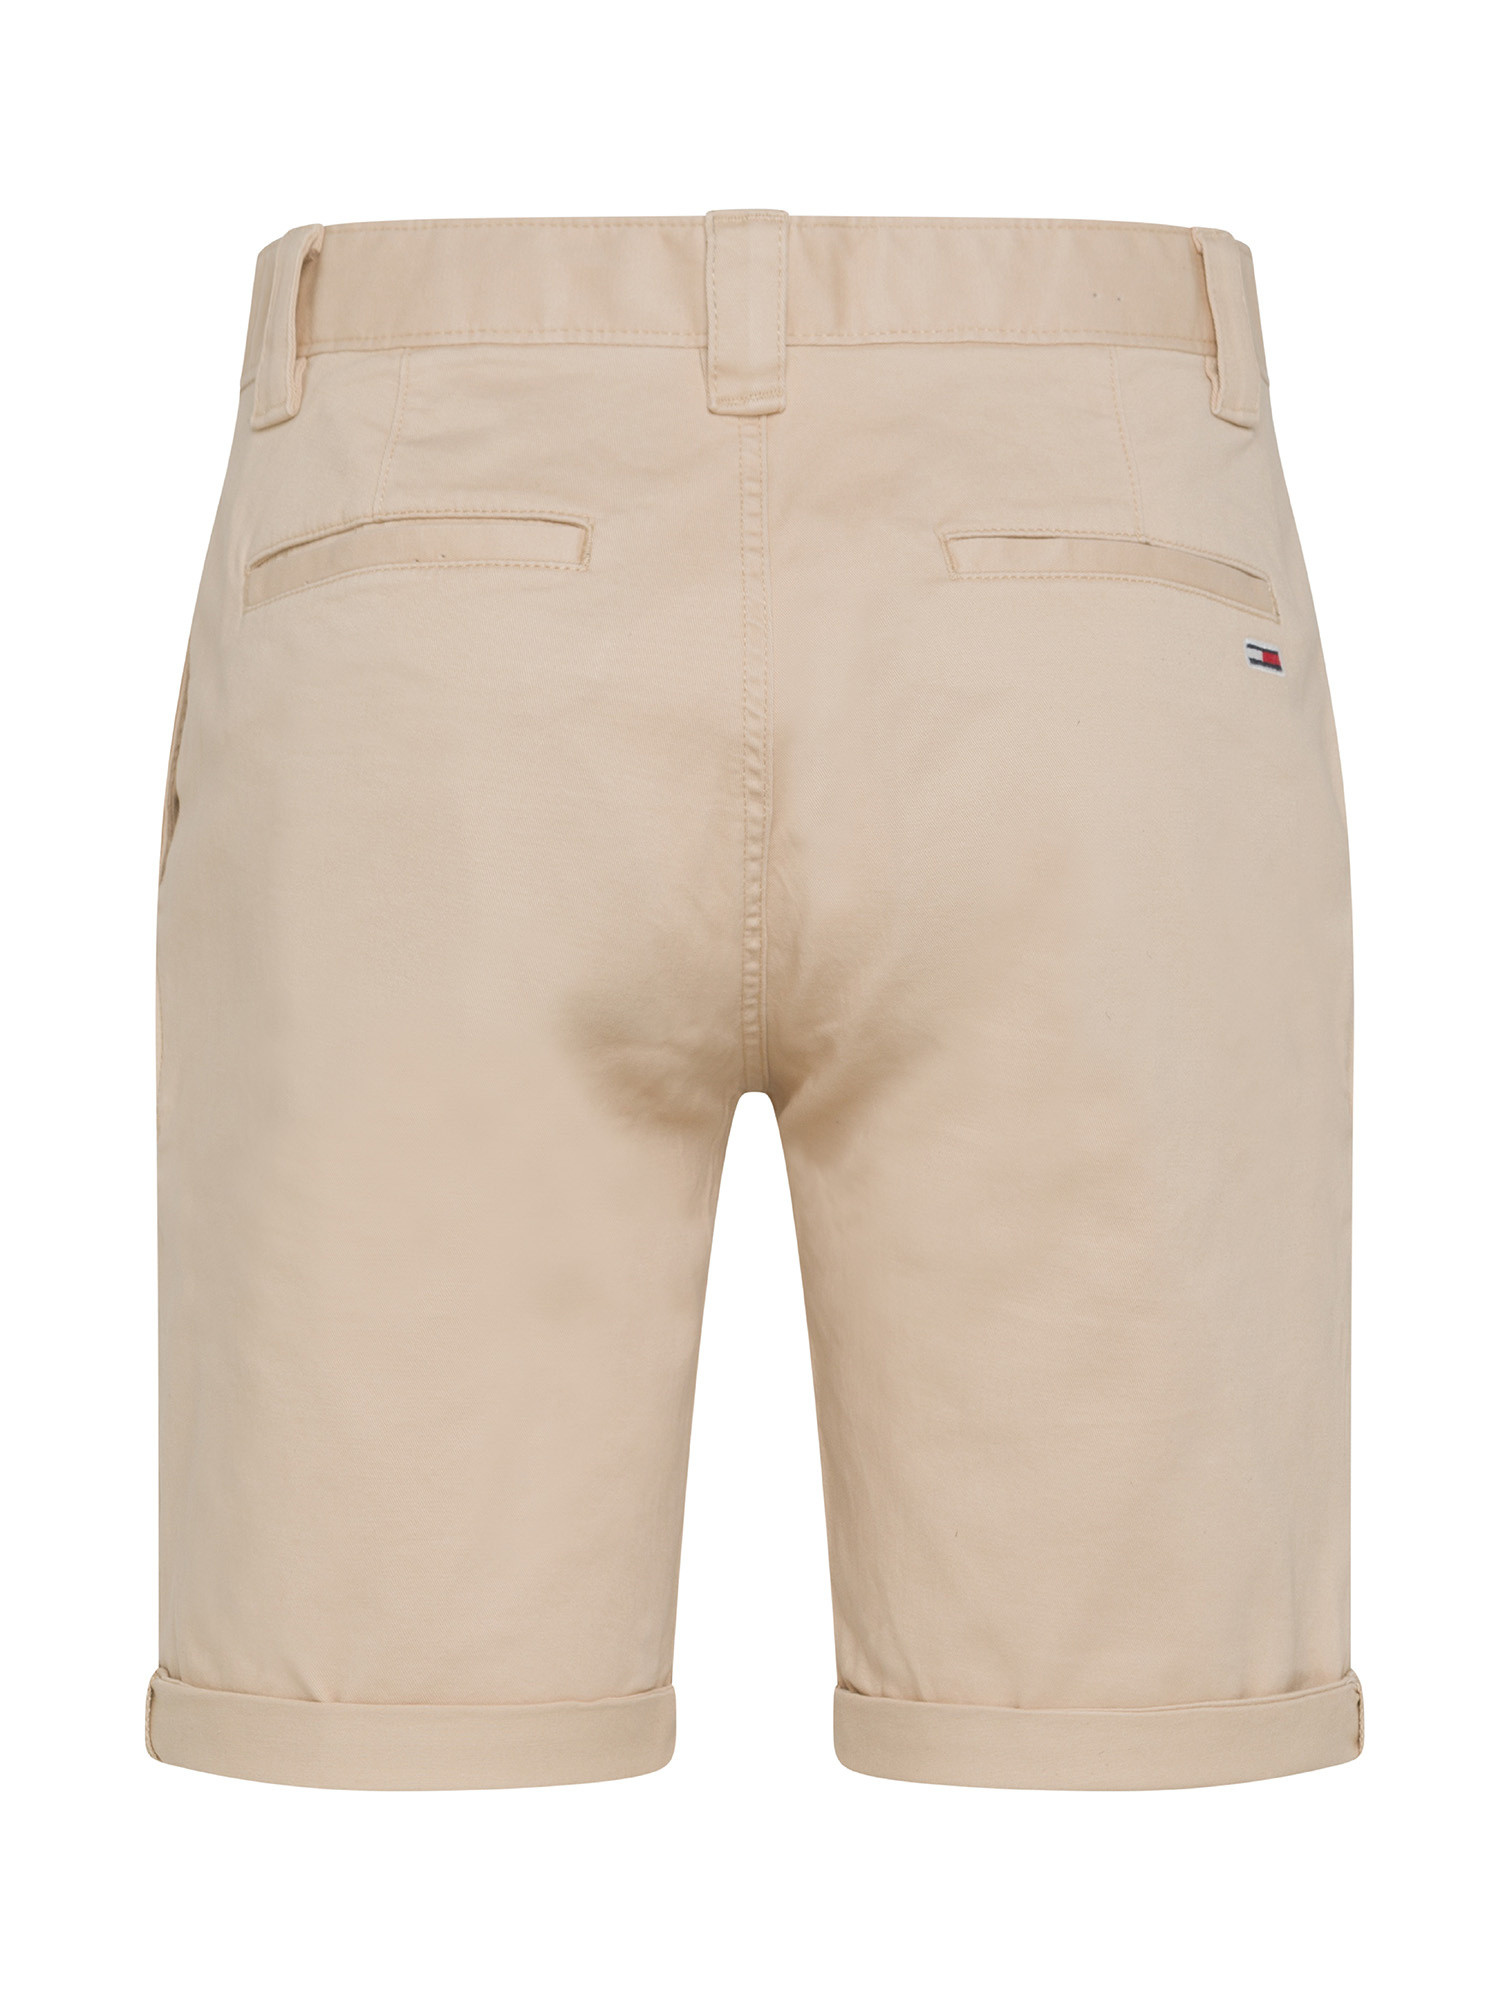 Tommy Jeans - Bermuda chino slim fit, Beige chiaro, large image number 1